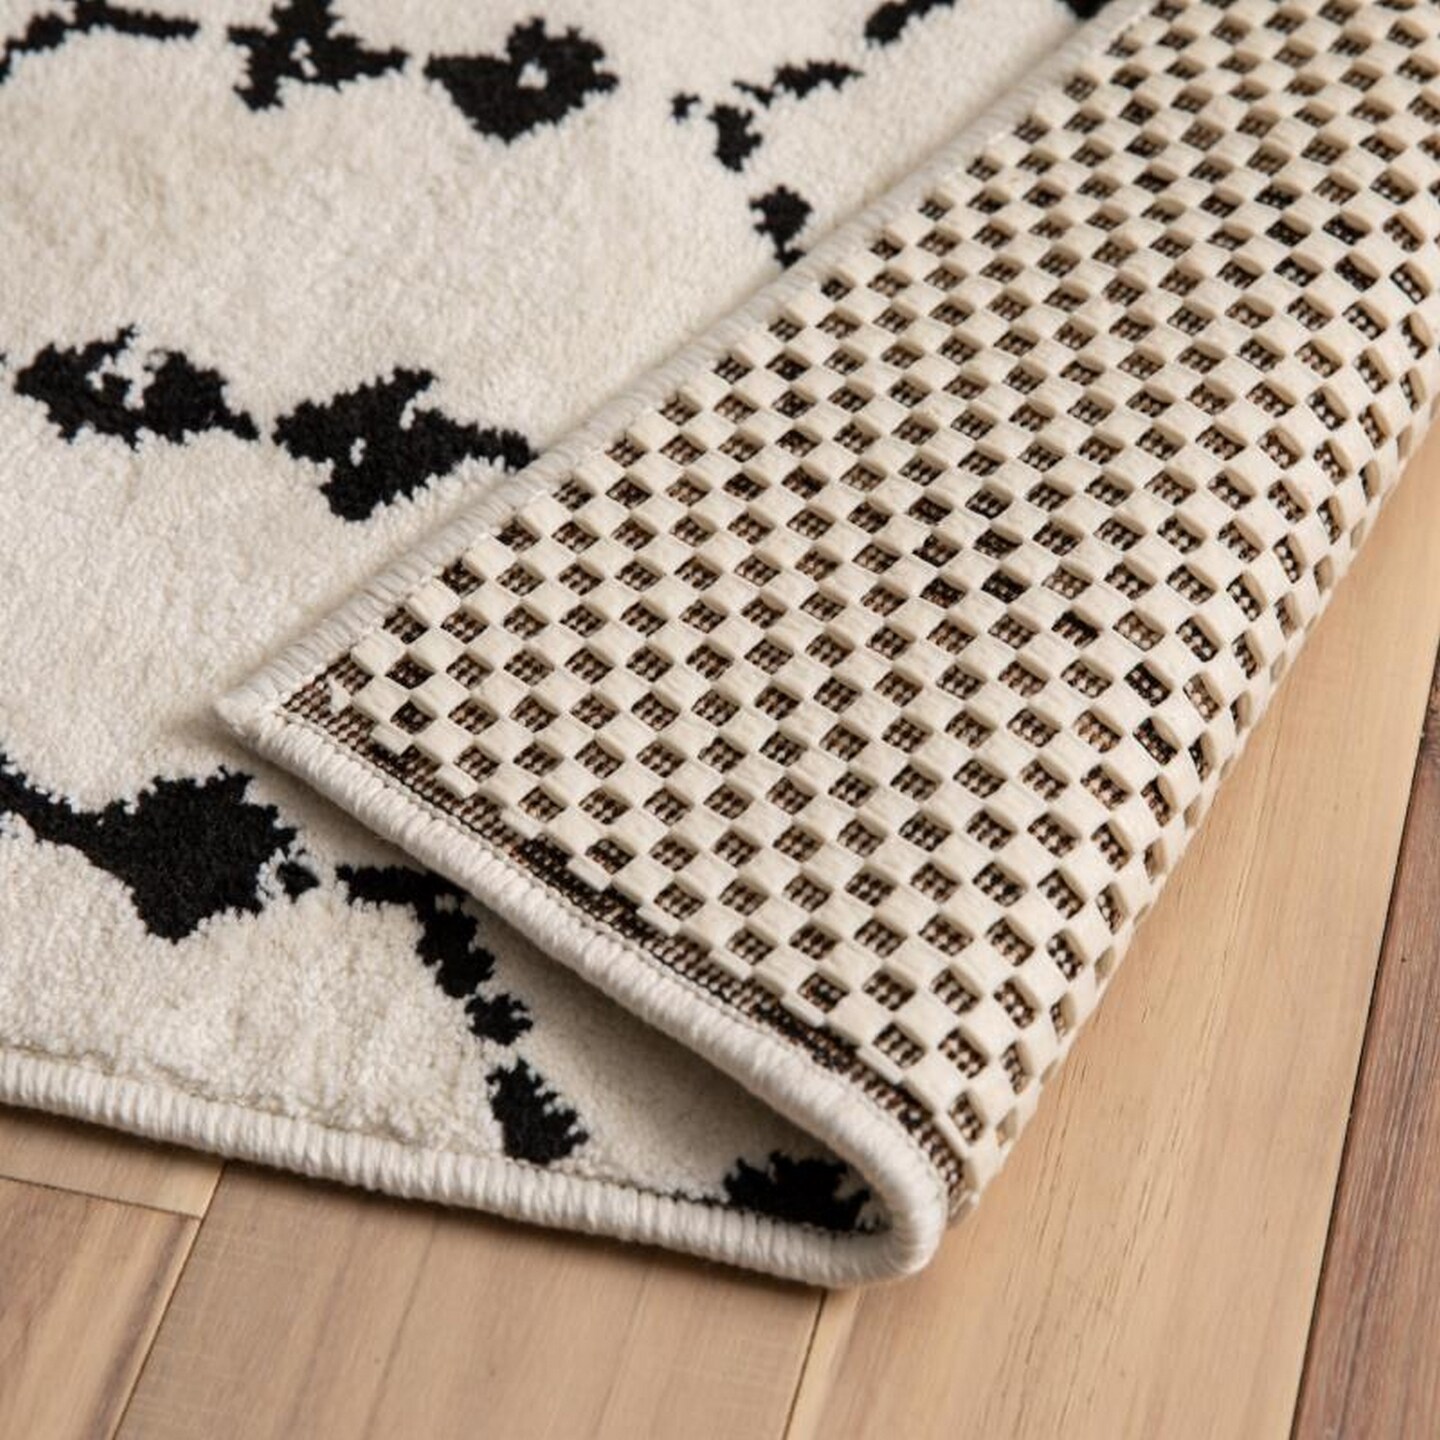 What Is Carpet Flooring? 5 Benefits to Know